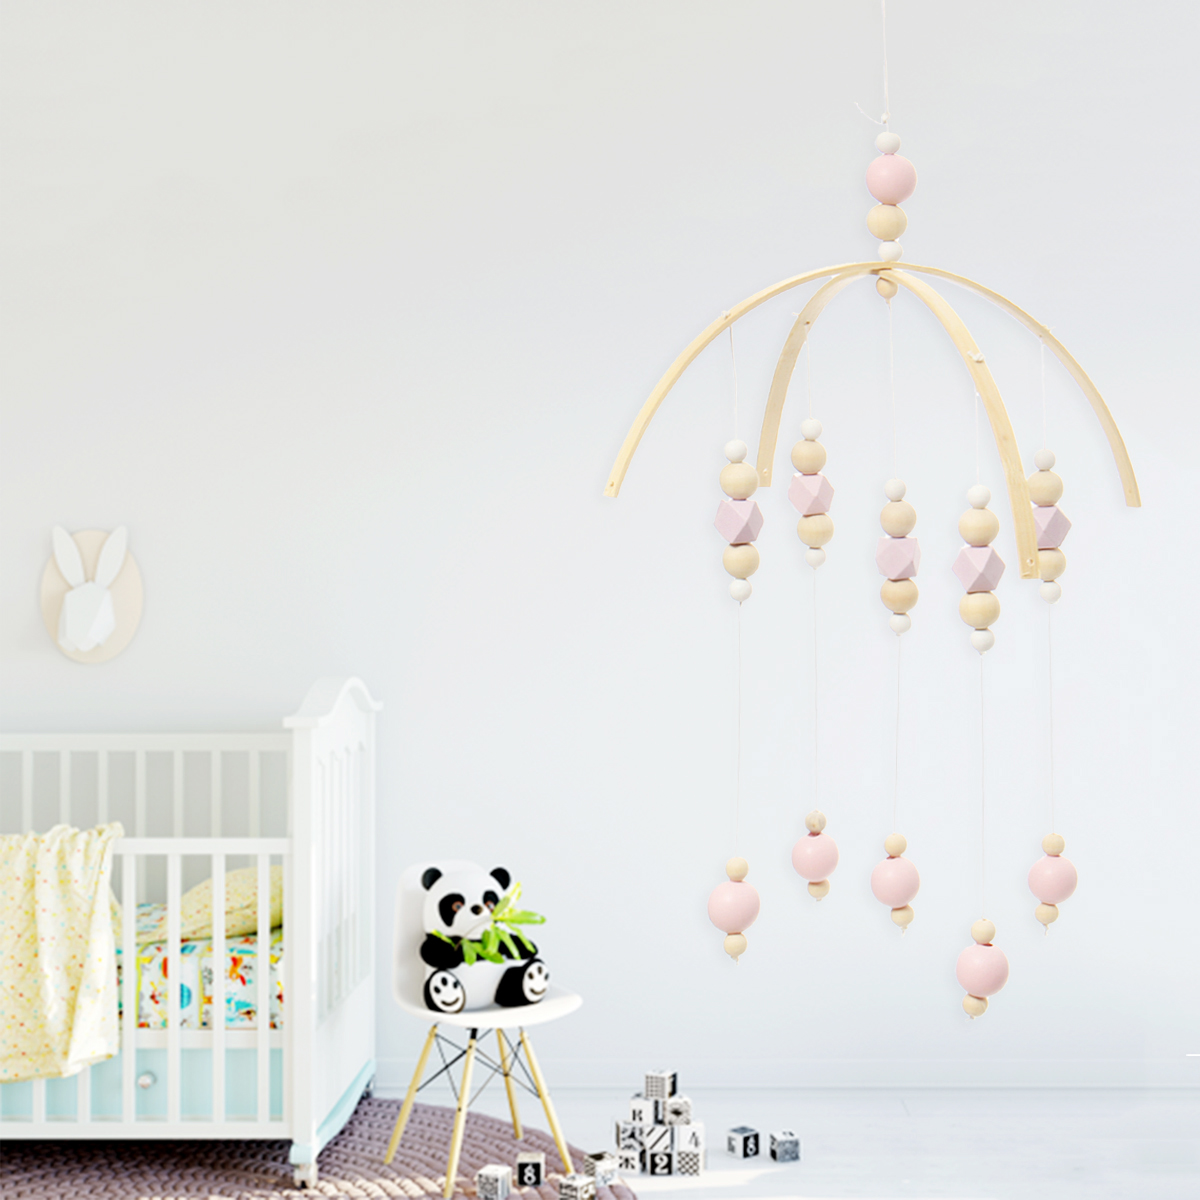 Wooden-Beads-Wind-Chimes-with-Wool-Balls-Baby-Bed-Hanging-Windbell-Crib-Tent-Kids-Room-Decorations-O-1906546-5